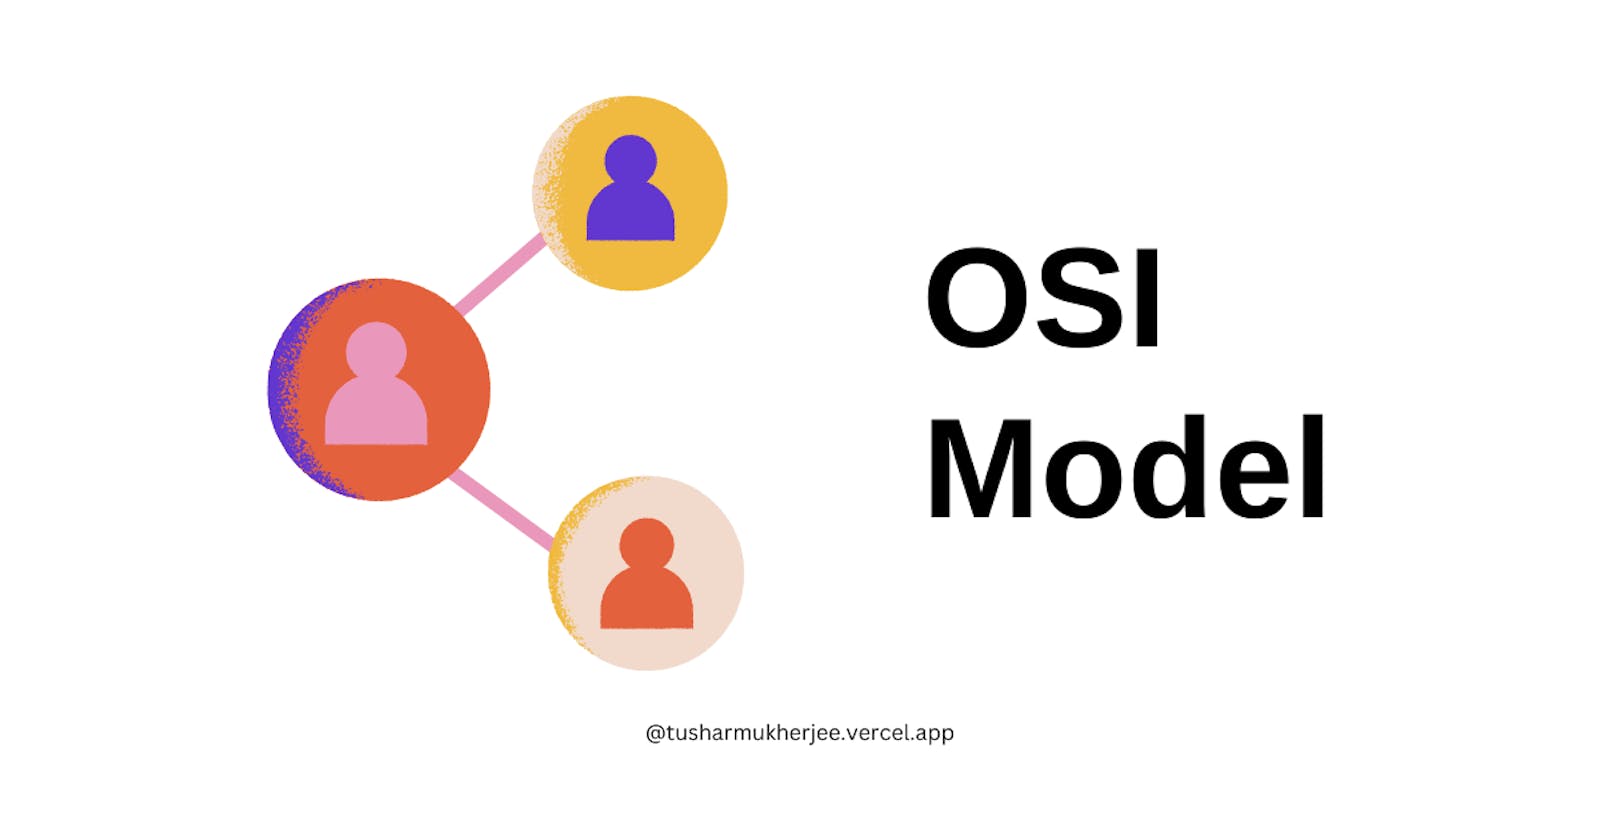 OSI ( Open System Interconnection Model)